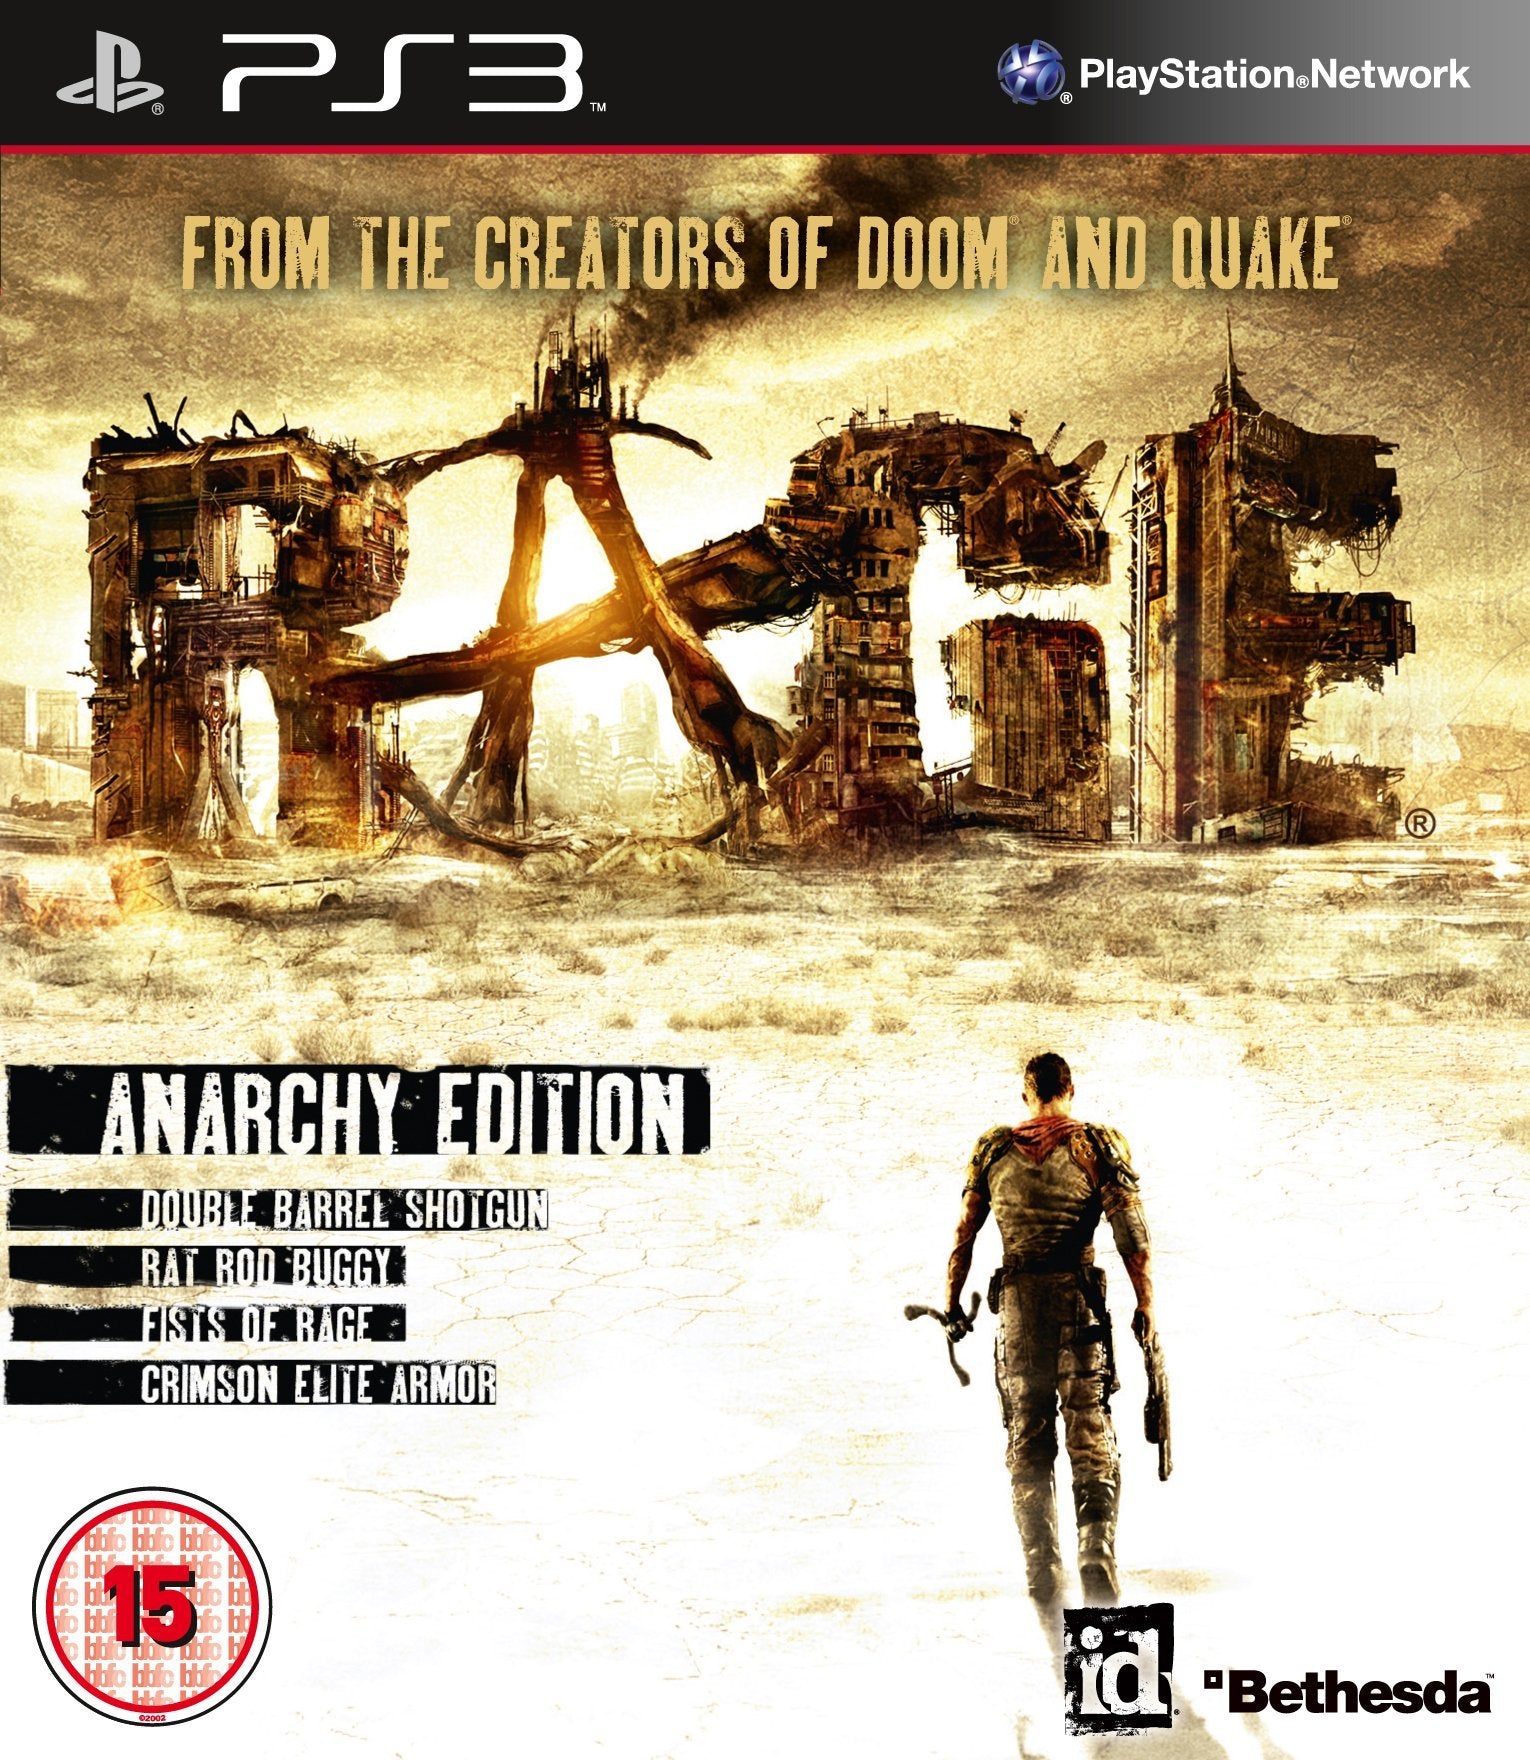 Game | Sony Playstation PS3 | Rage [Anarchy Edition]